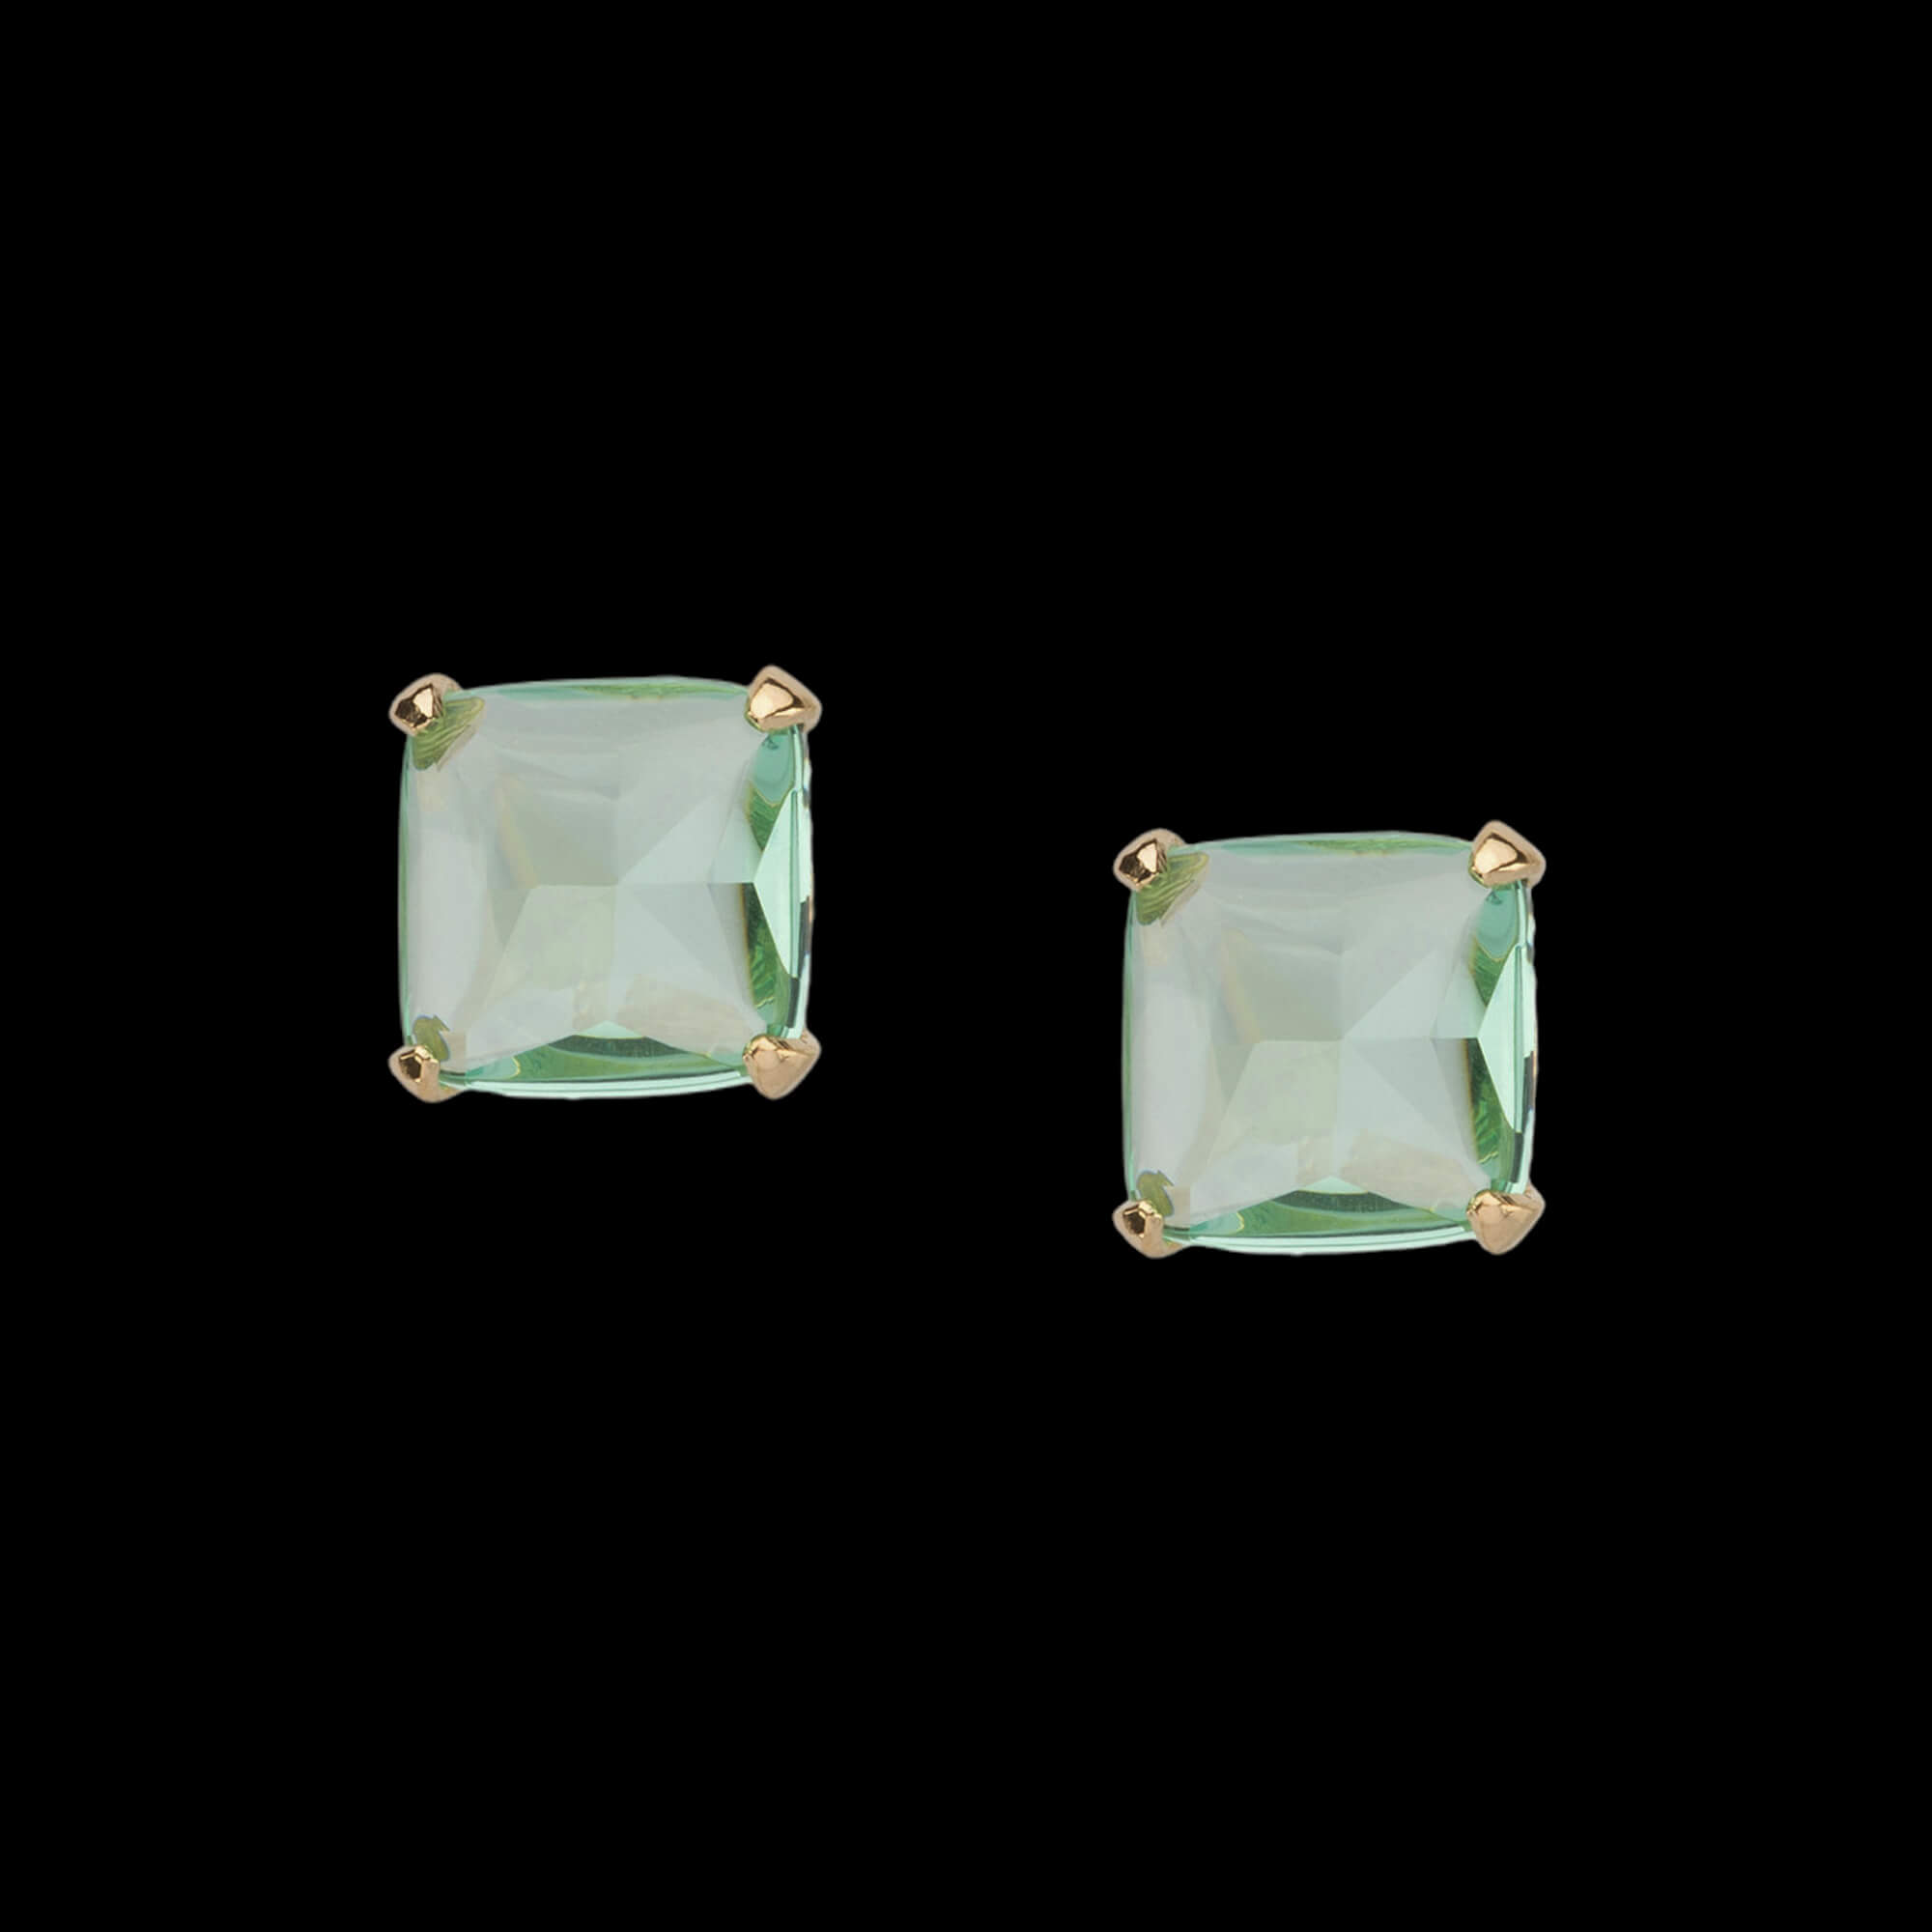 Green and gilt fourth-shaped earrings